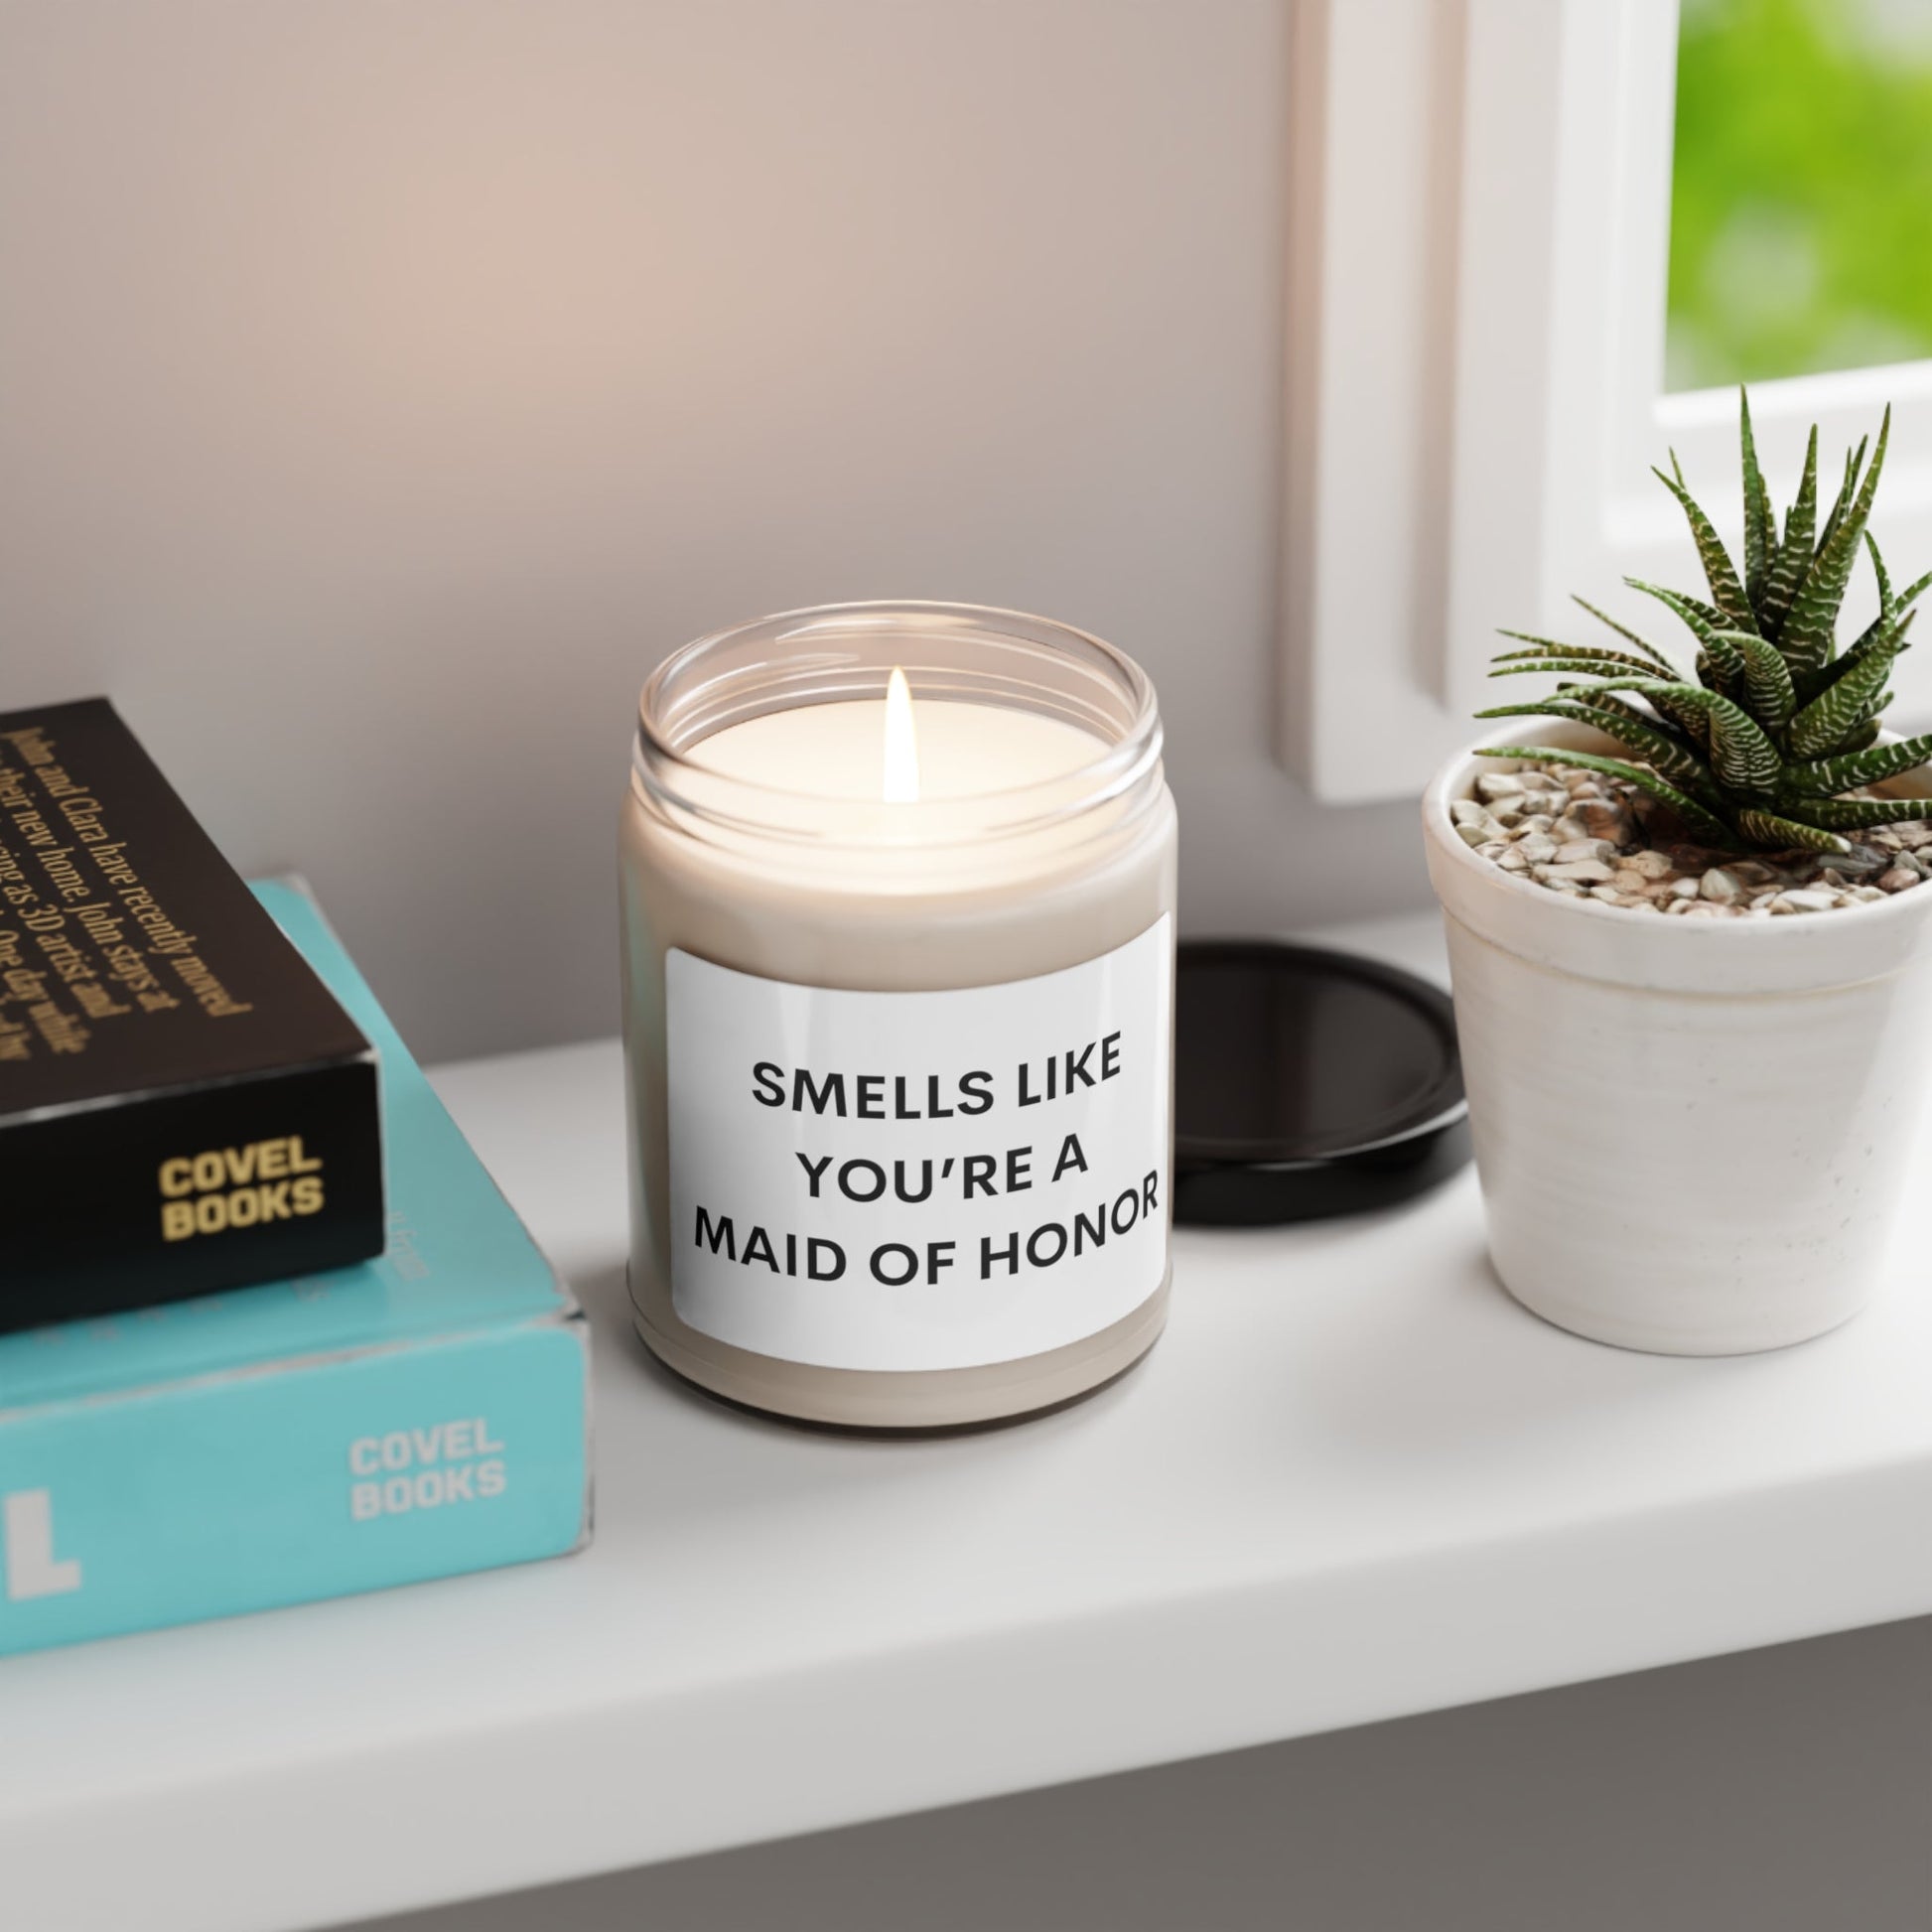 Get trendy with Smells Like you're a Maid of Honor Candle - Home Decor available at Good Gift Company. Grab yours for $21 today!